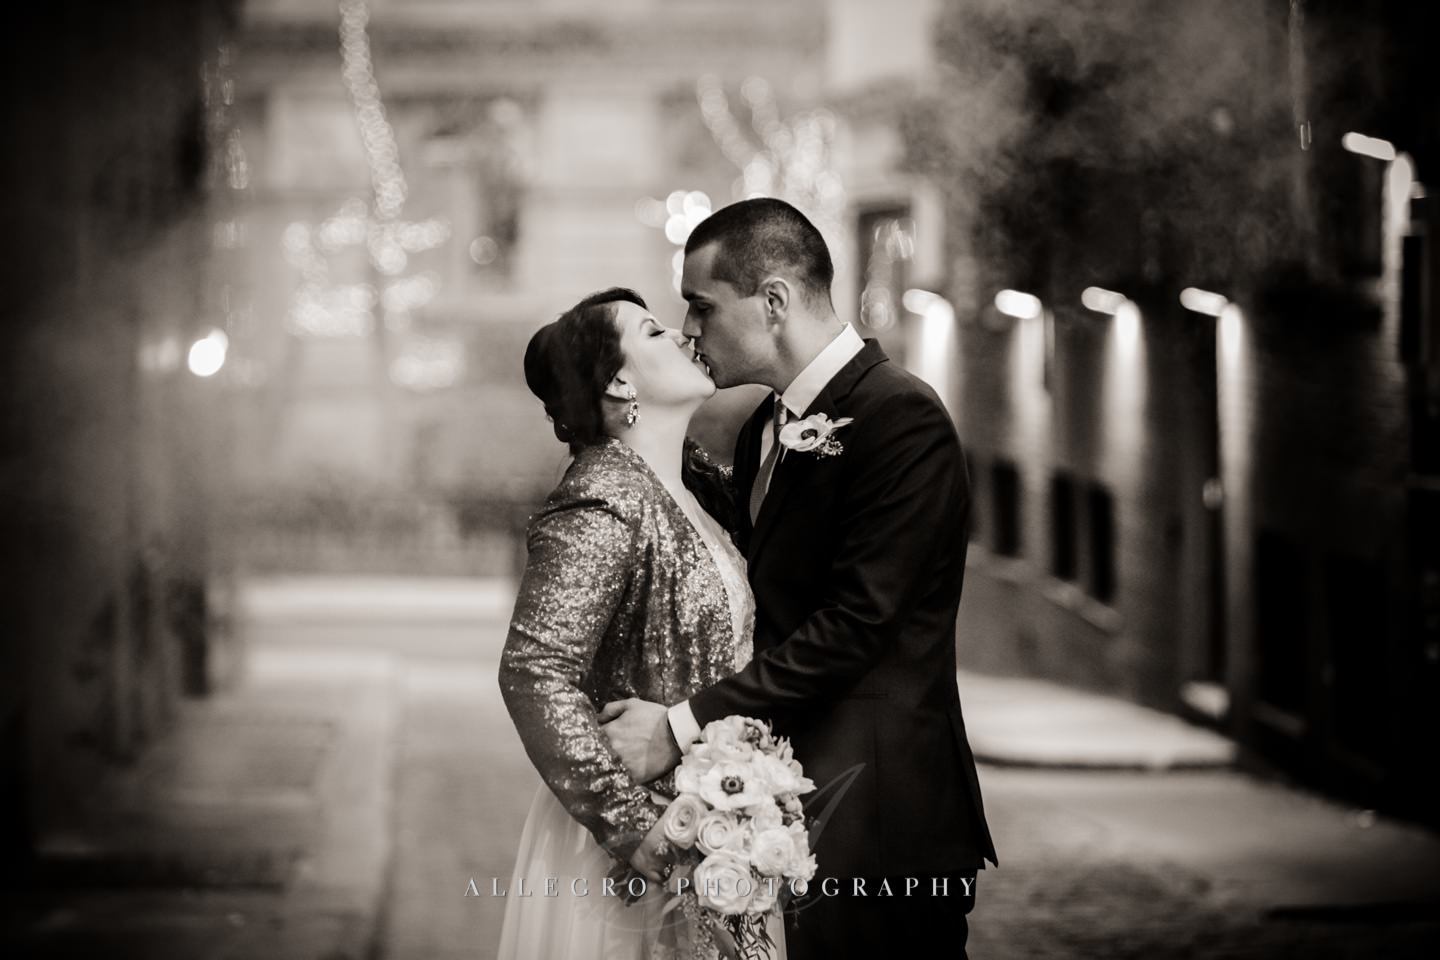 smokey alley way kiss in downtown boston -photo by Allegro Photography